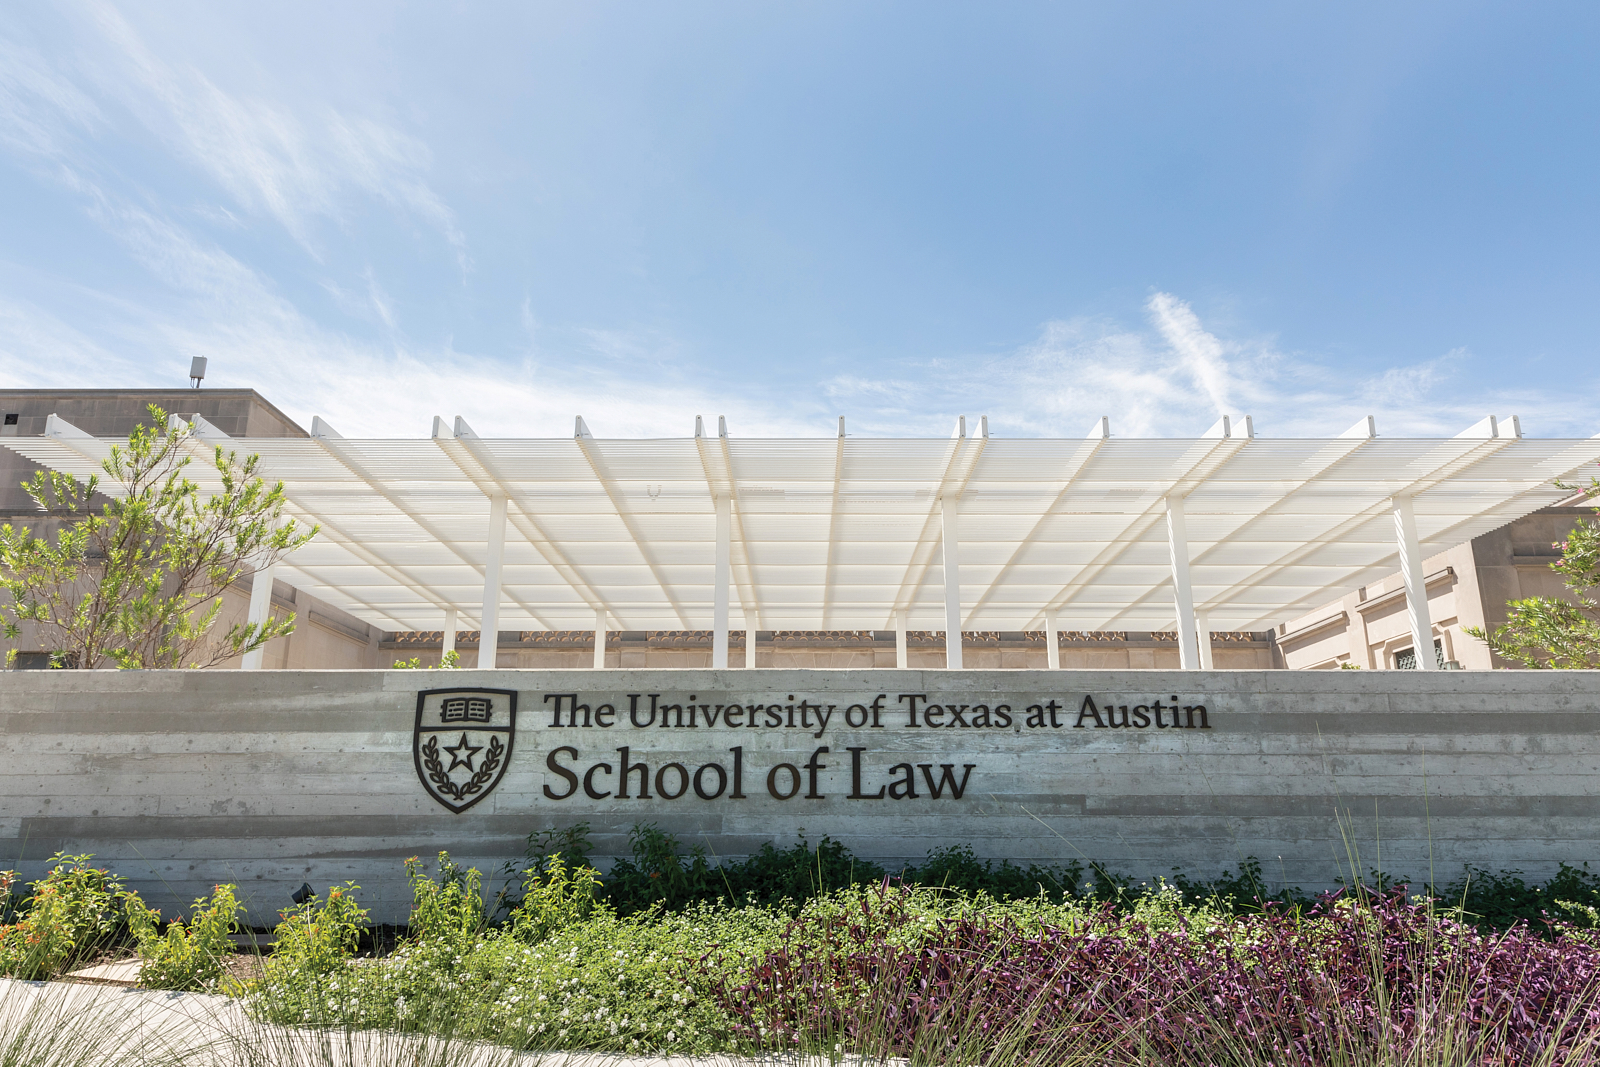 Texas Law’s New Courtyard and Plaza give the Prestigious School a New